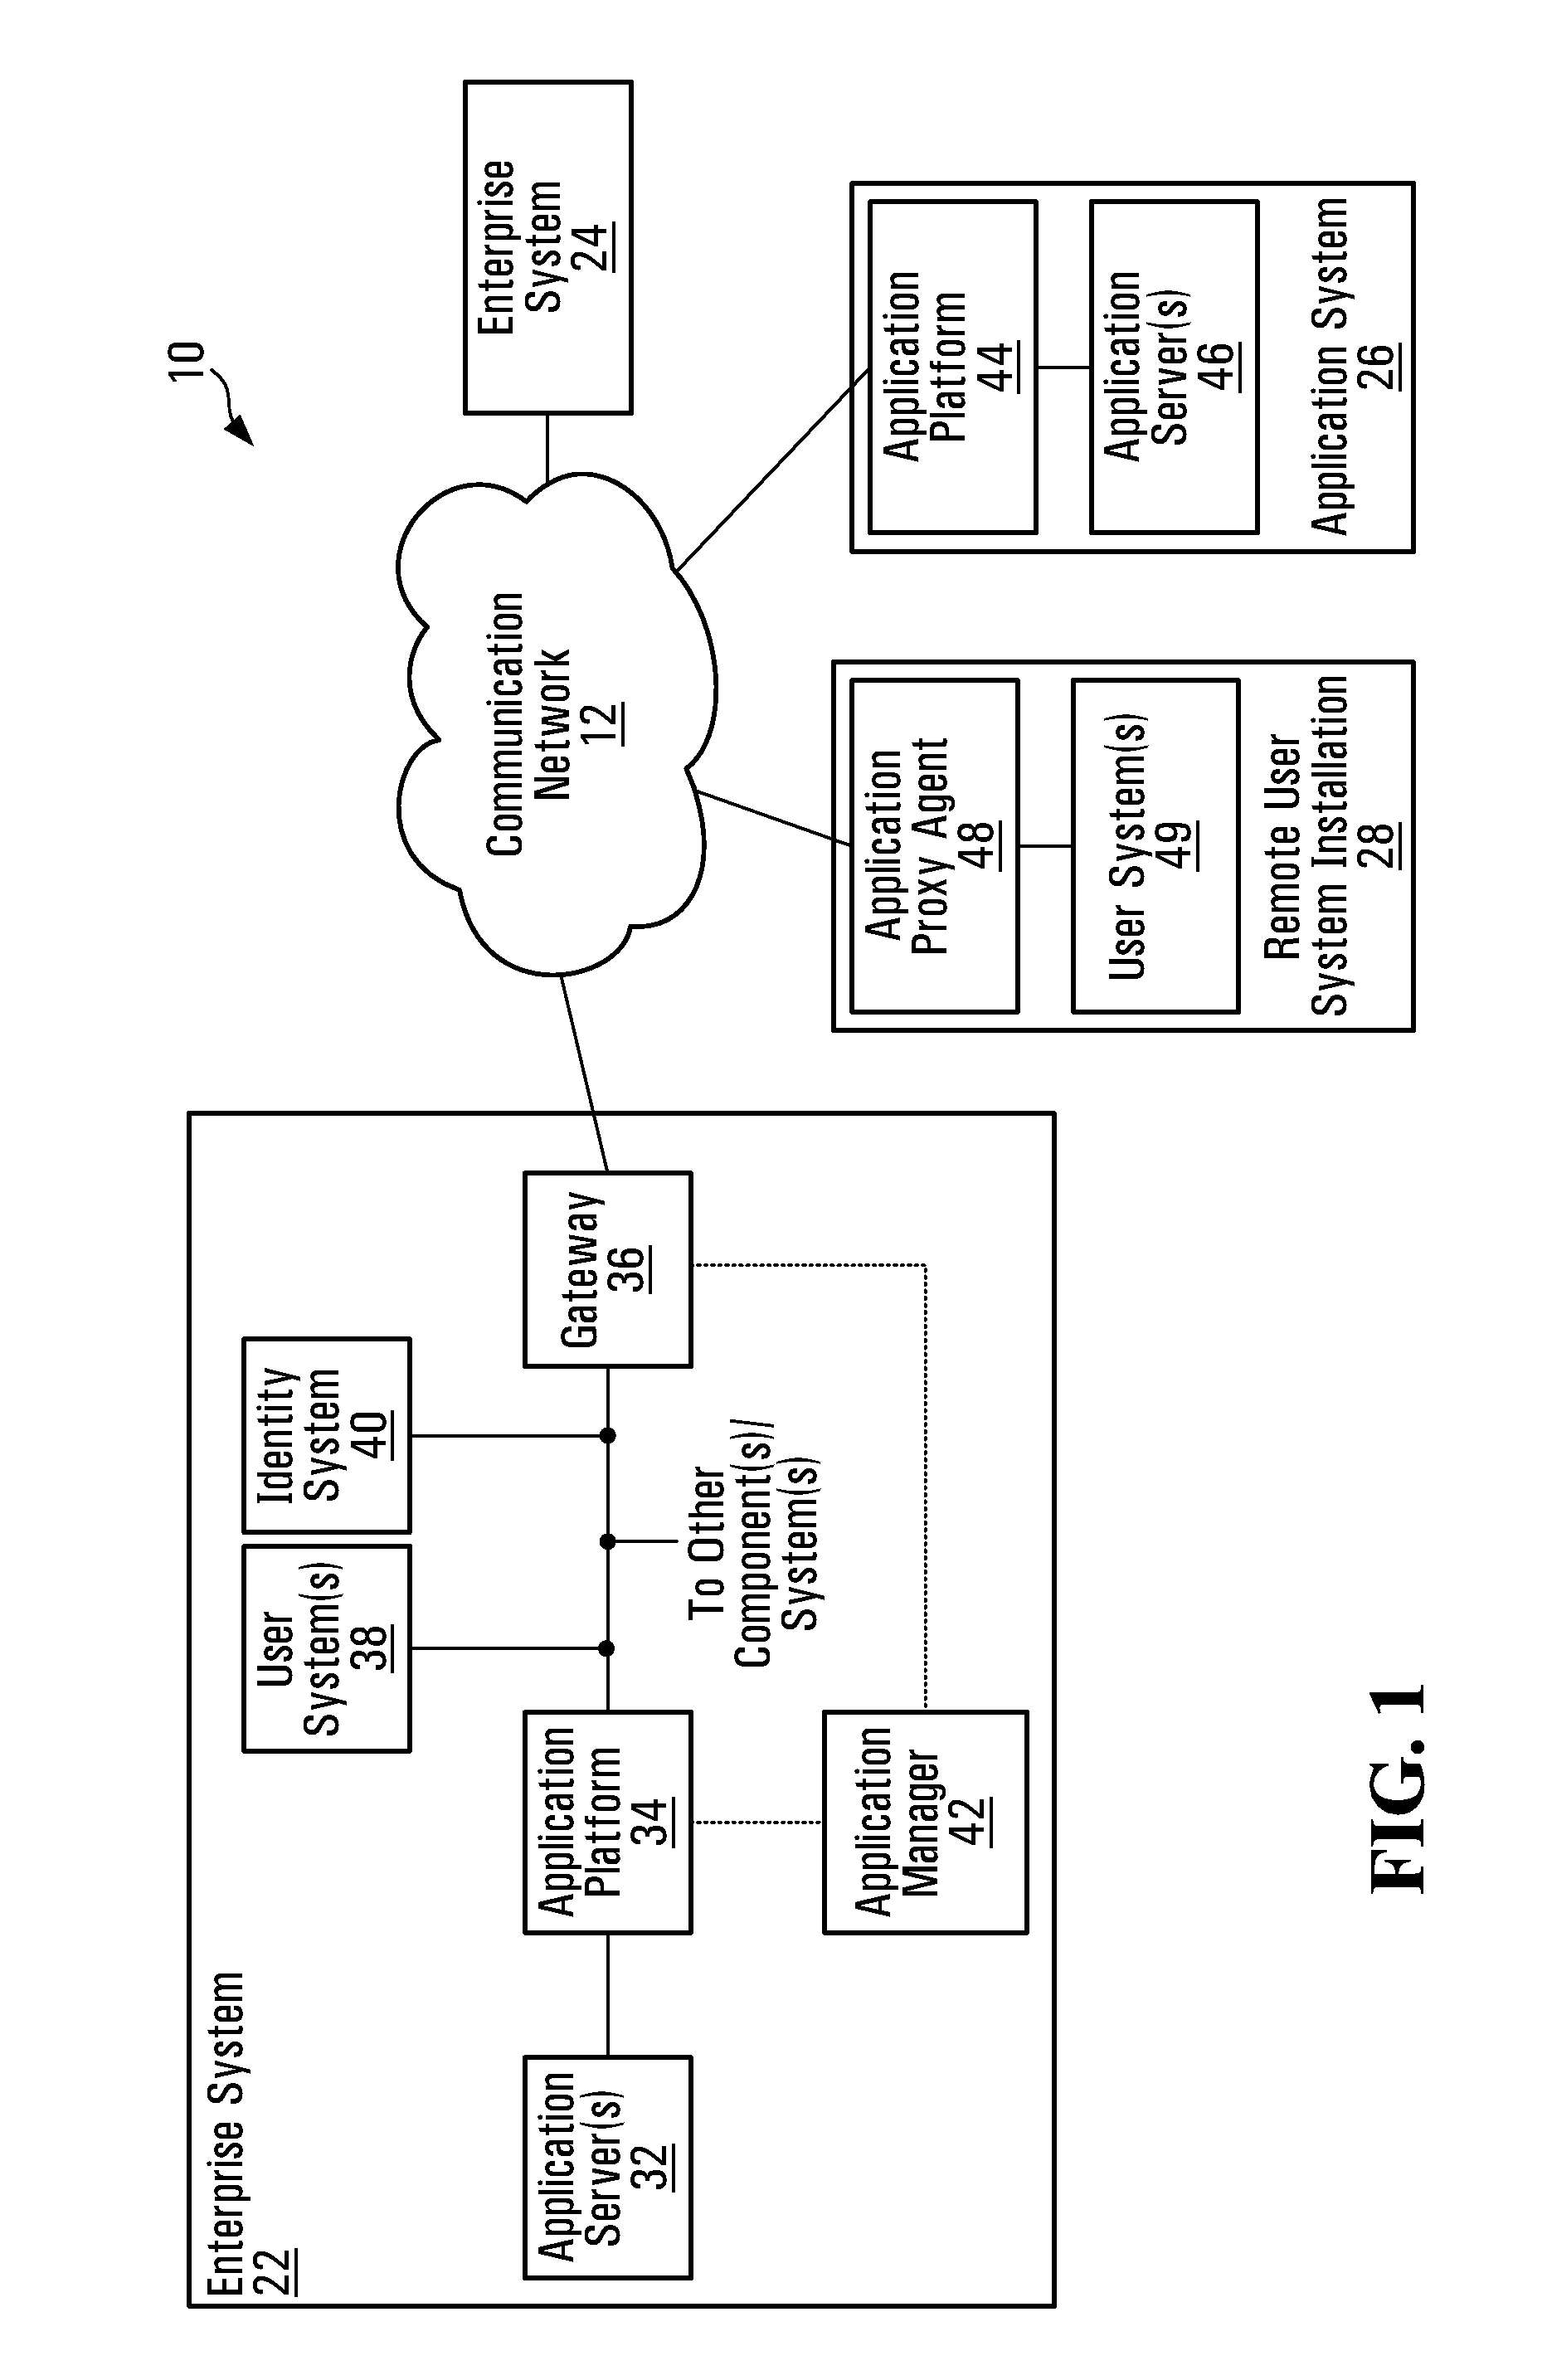 Secure domain information protection apparatus and methods